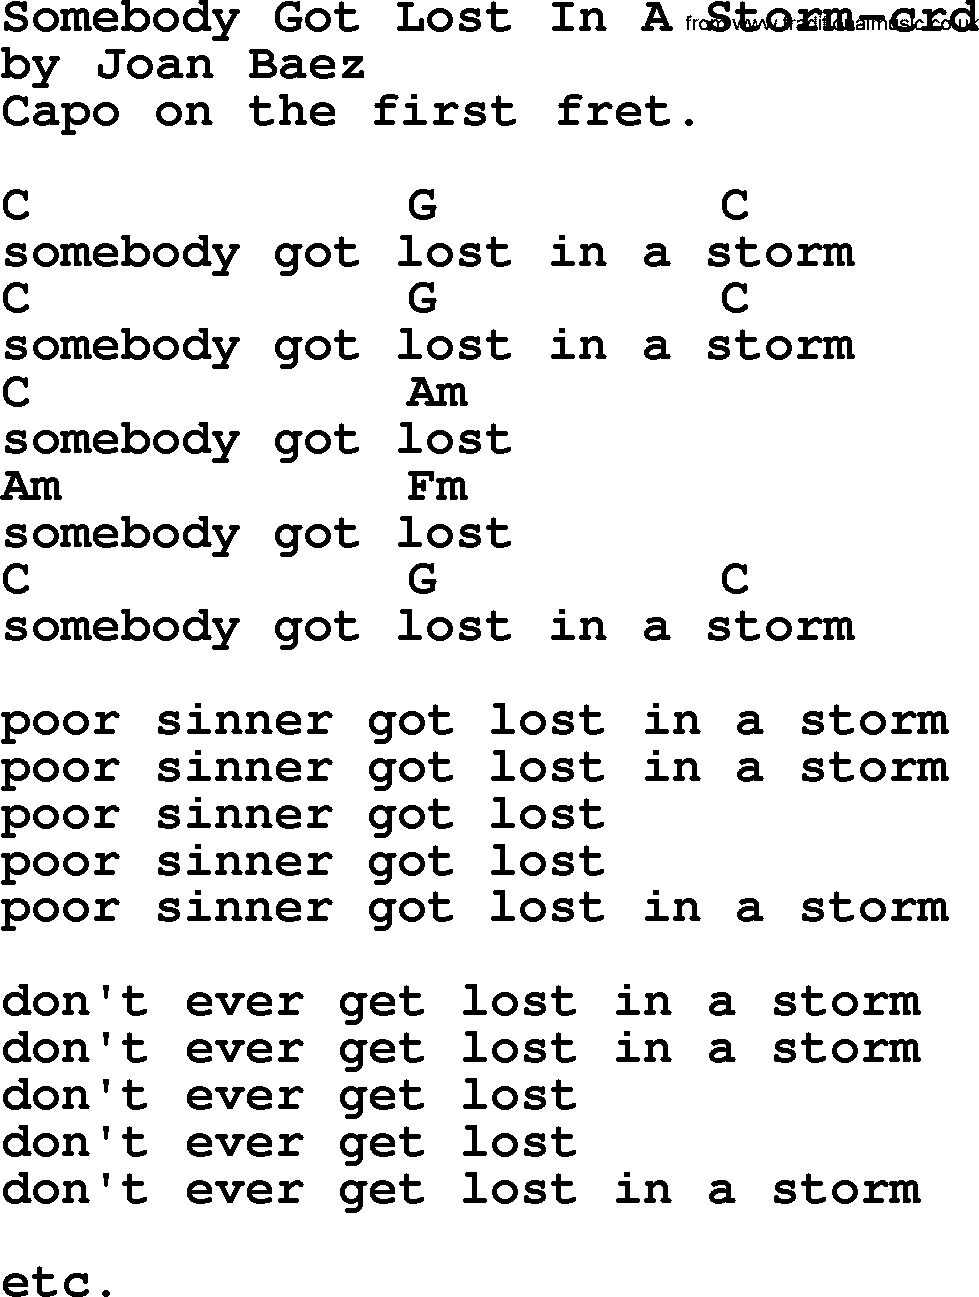 Joan Baez song Somebody Got Lost In A Storm lyrics and chords